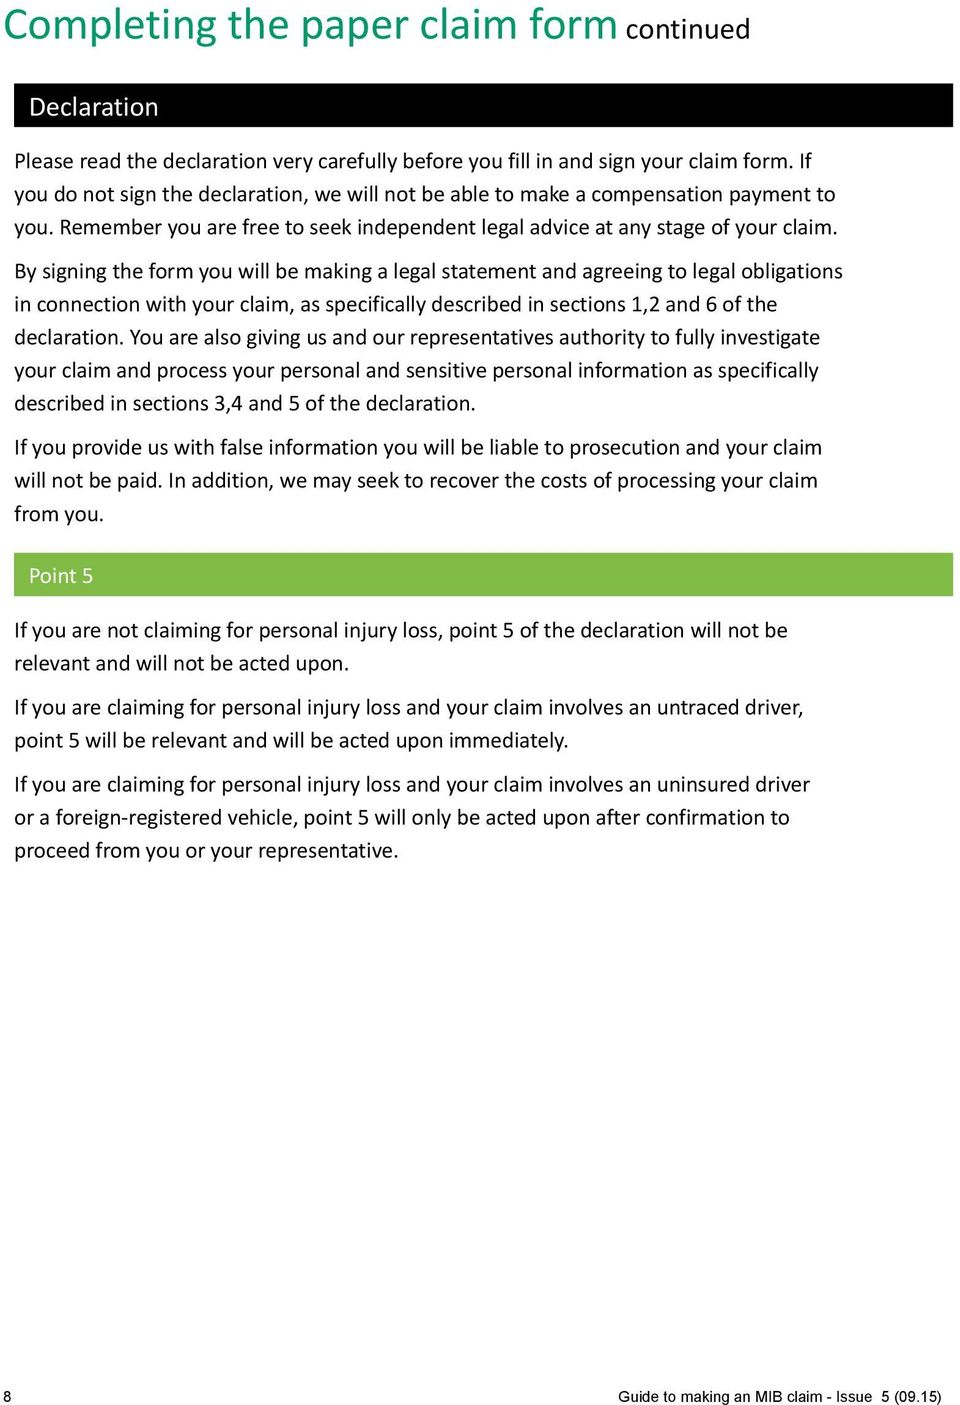 By signing the form you will be making a legal statement and agreeing to legal obligations in connection with your claim, as specifically described in sections 1,2 and 6 of the declaration.